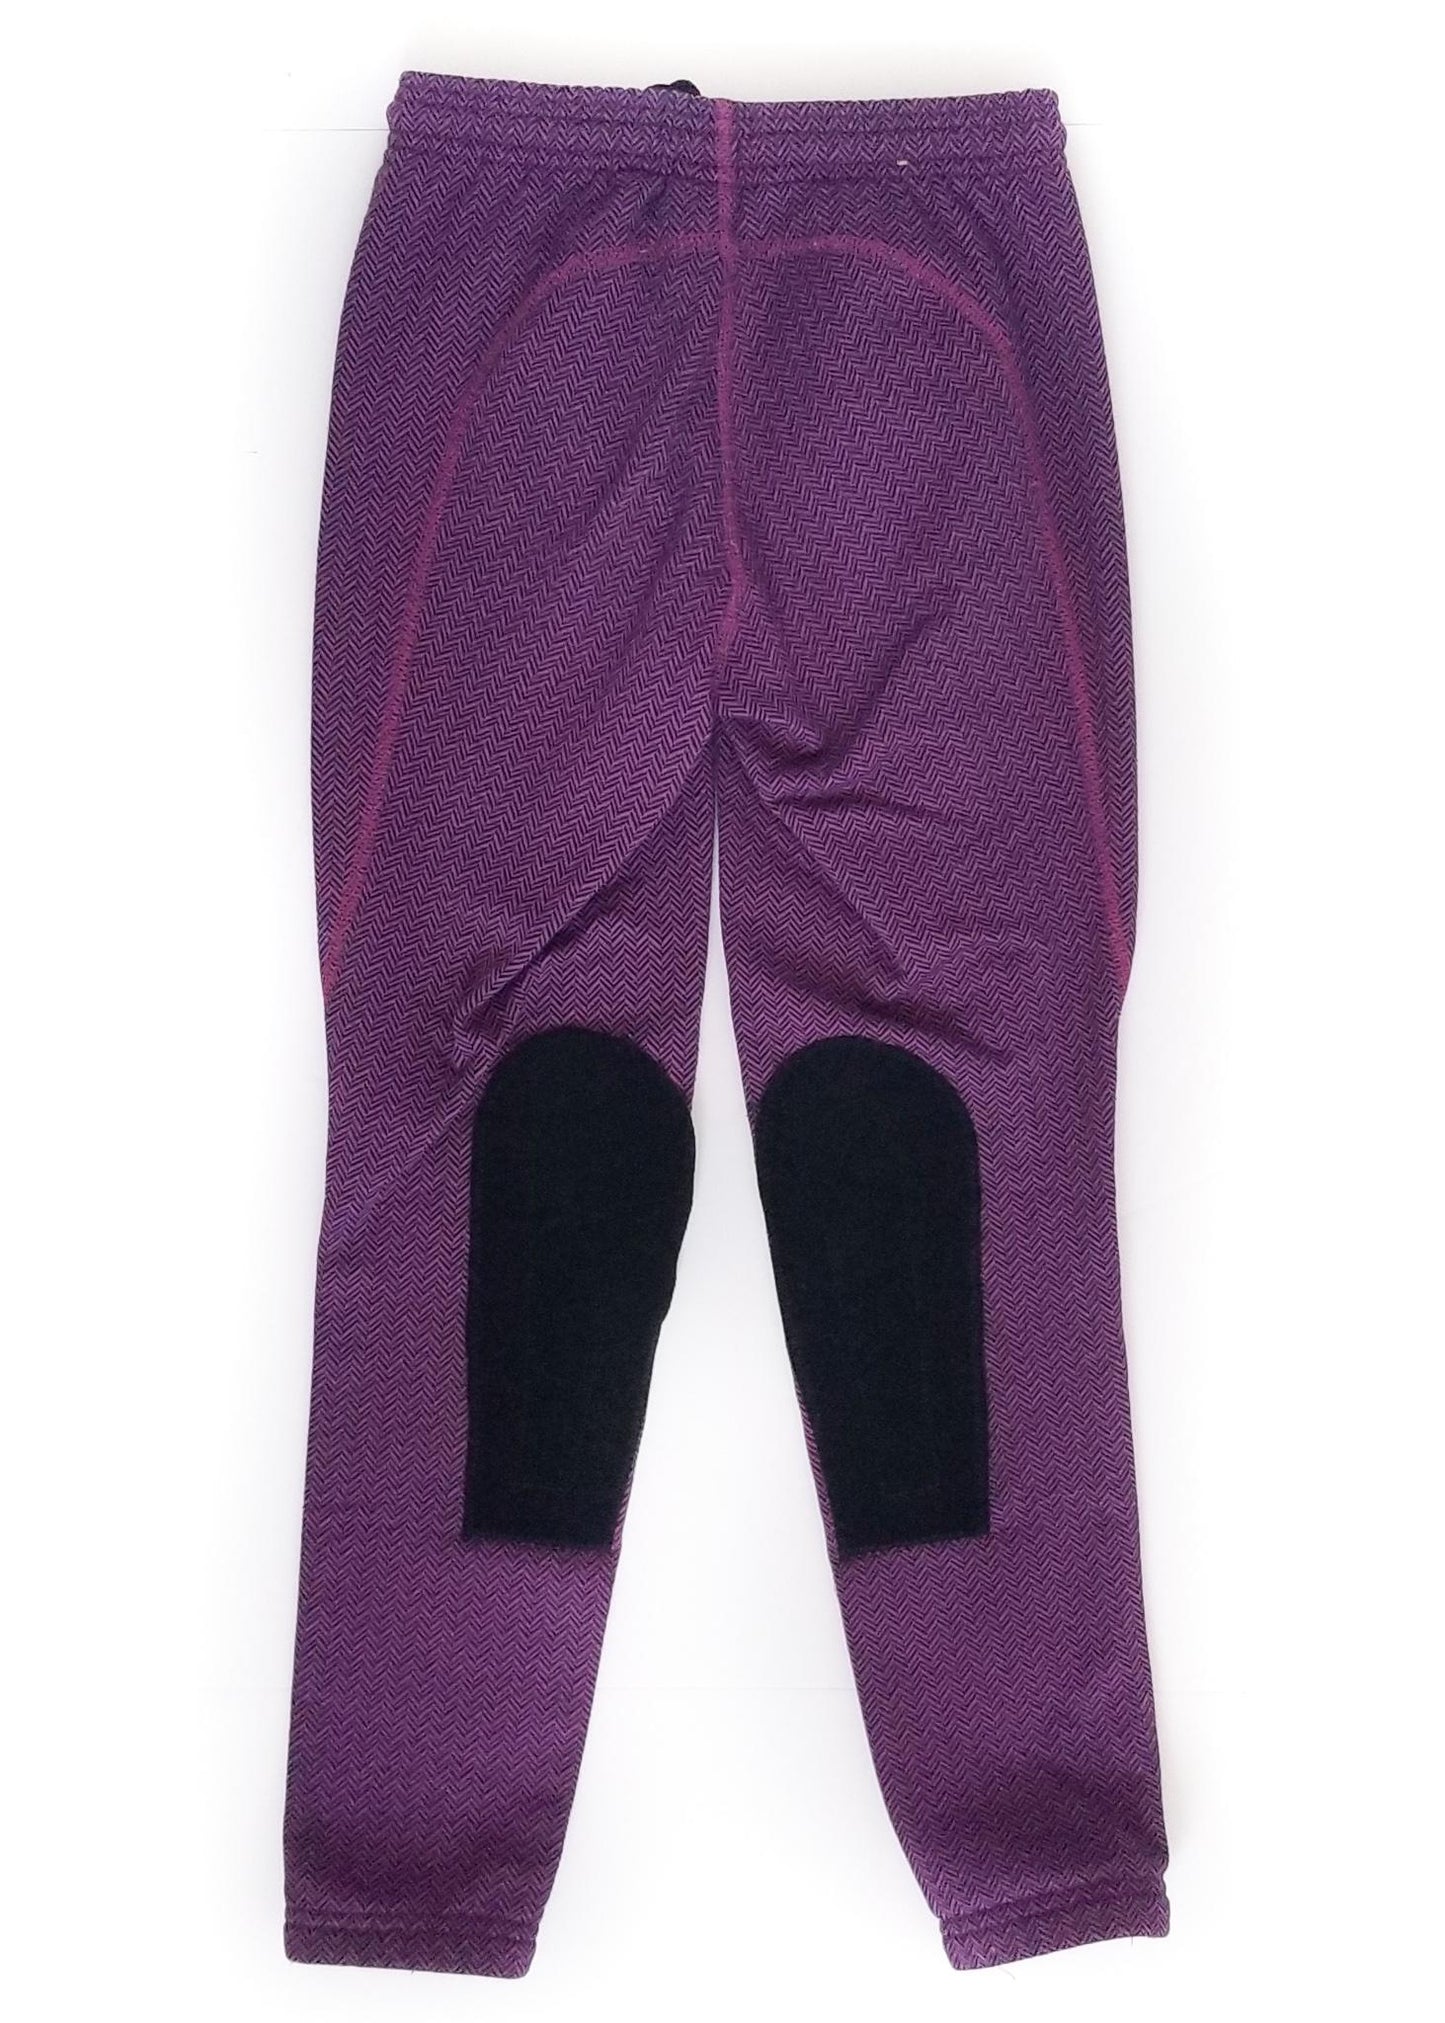 Kerrits Knee Patch Tight - Purple - Youth Large